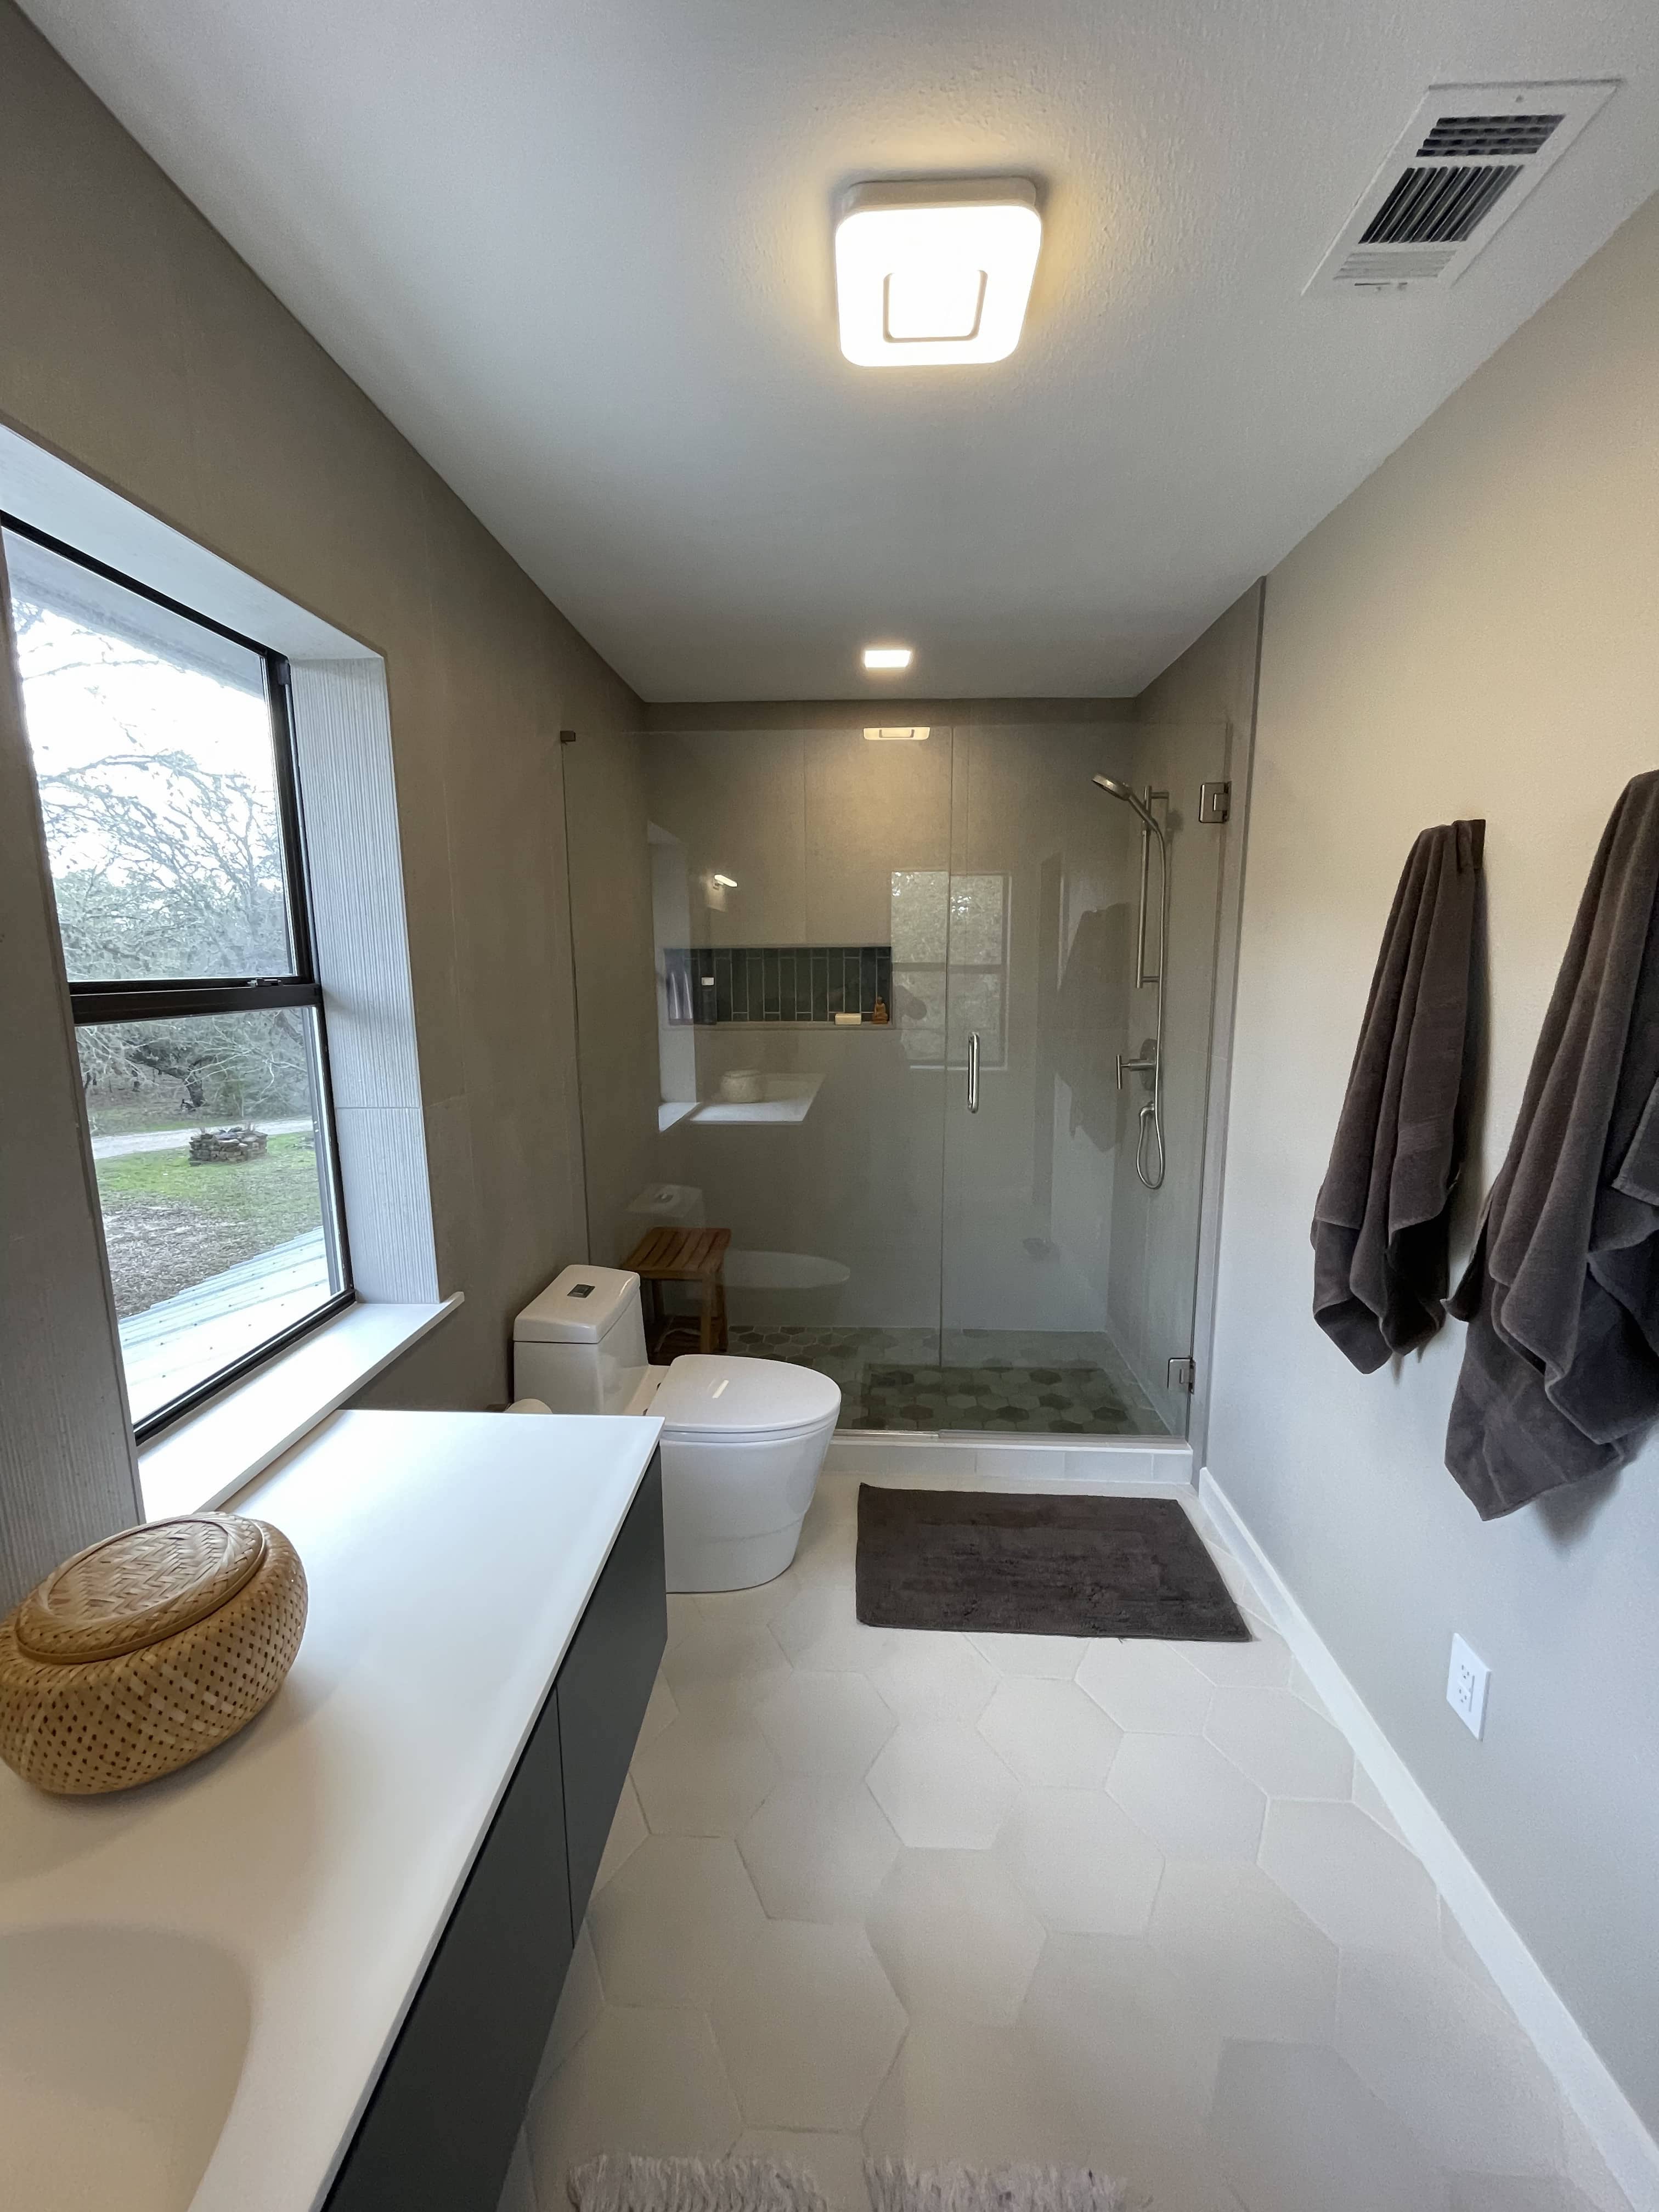 Best Bathroom Renovation In Central Texas, Serving San Marcos, Texas and Surrounding Cities